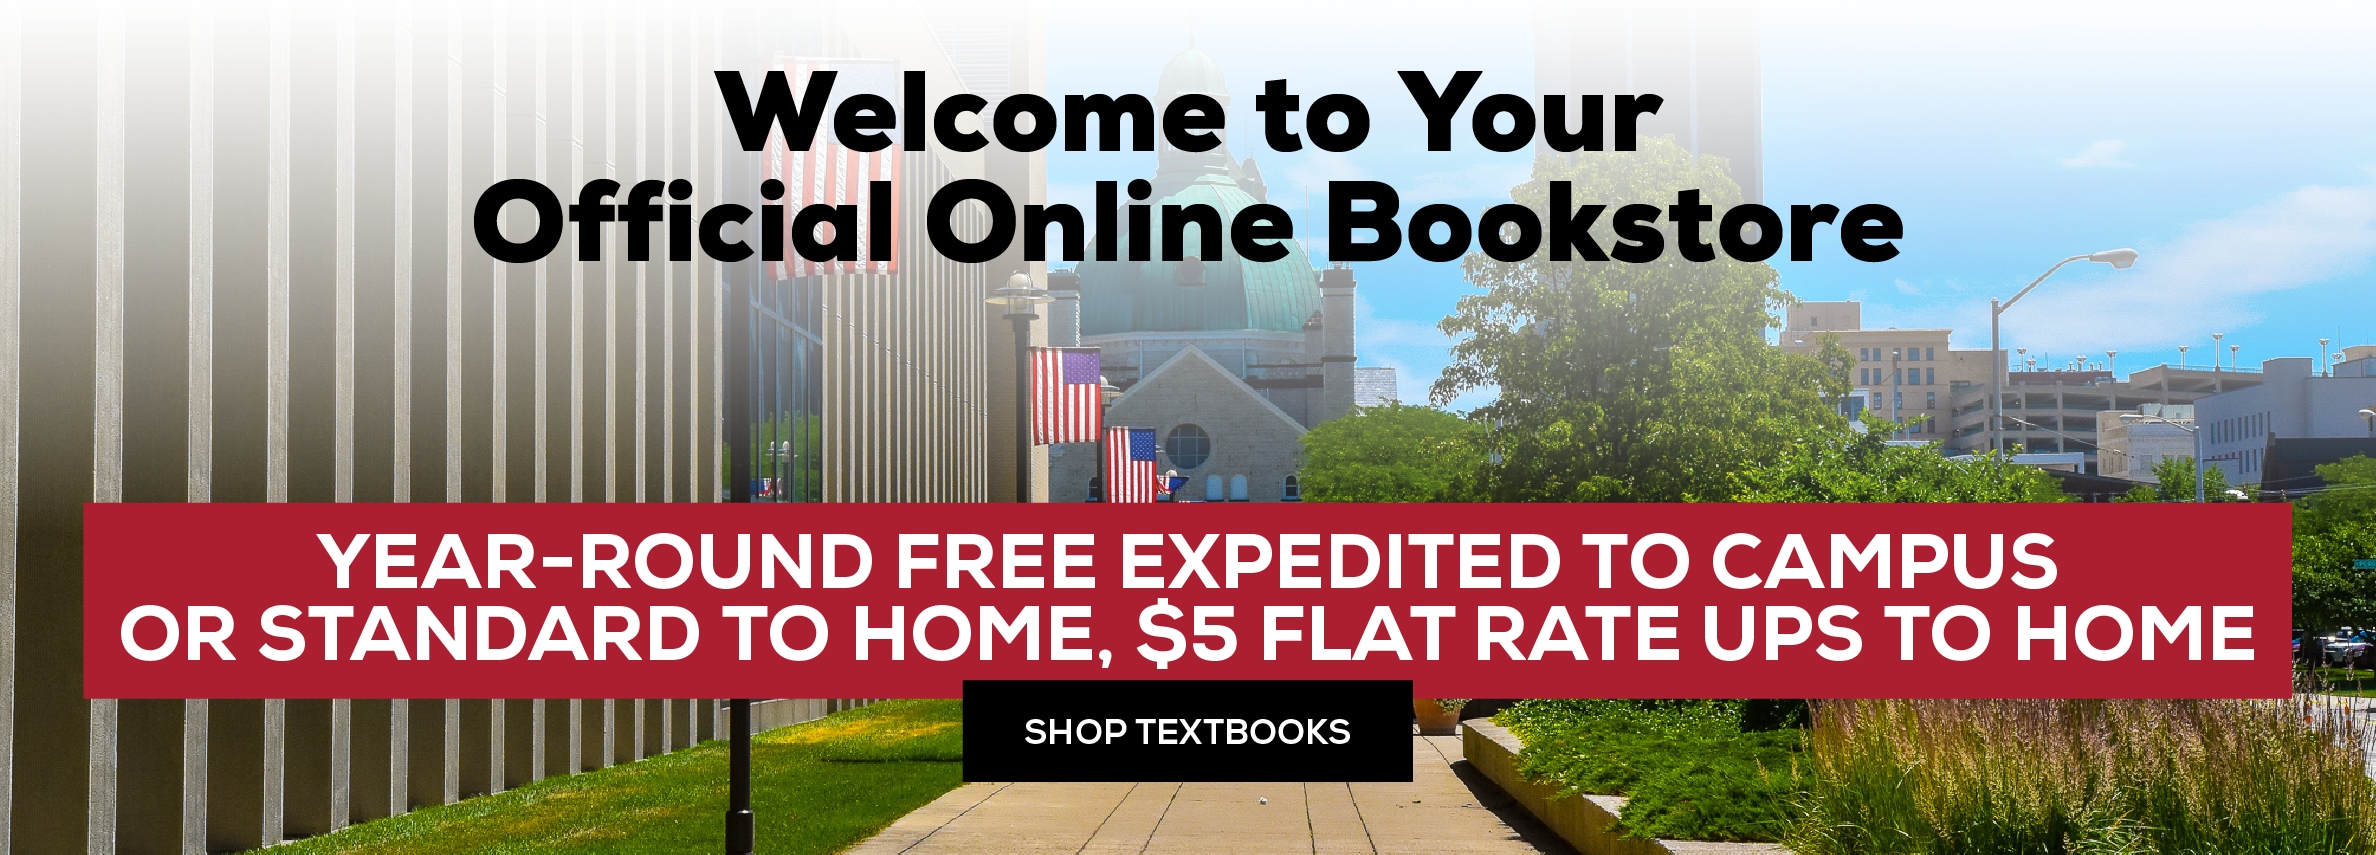 Welcome to your official Online bookstore. Year-Round free expedited to campus or standard to home, $5 flat rate UPS to home. Shop Textbooks